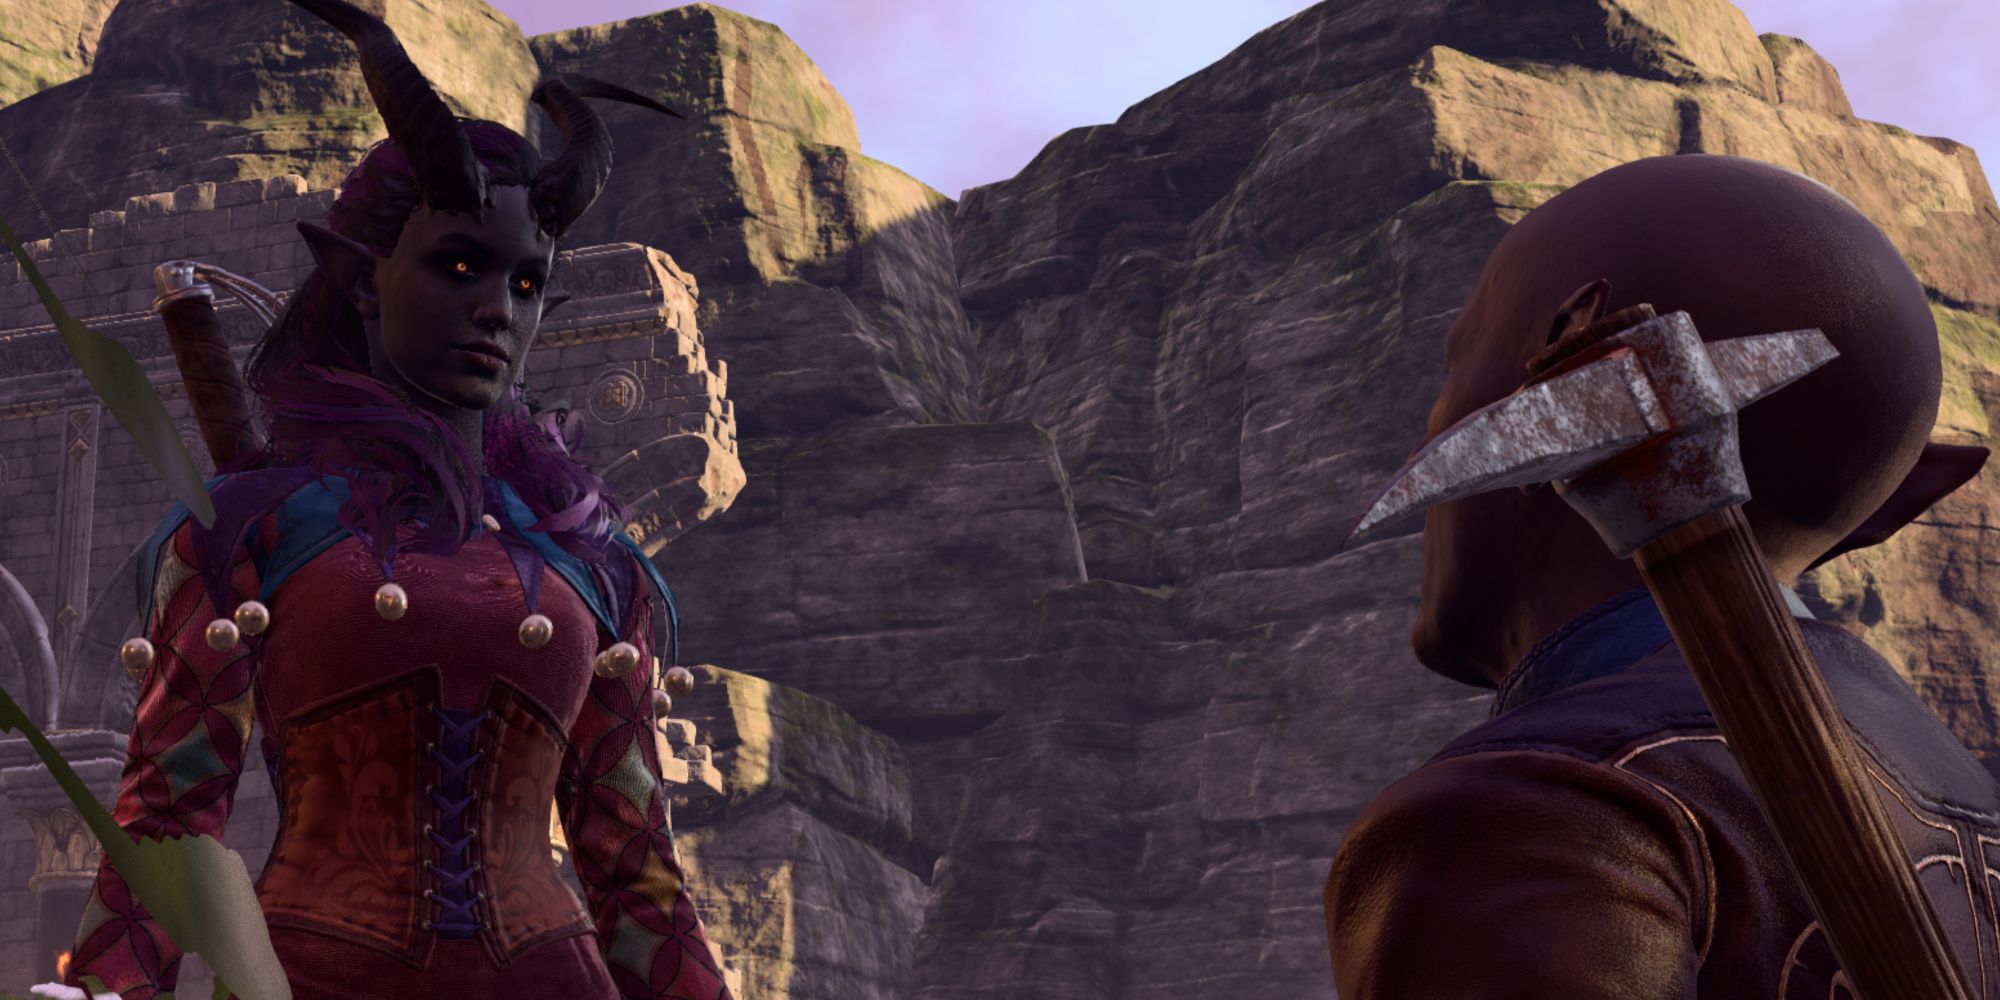 A Player Character Designed To Look Like Tiefling Bard Alfira Speaks To Barcus In Baldur's Gate 3